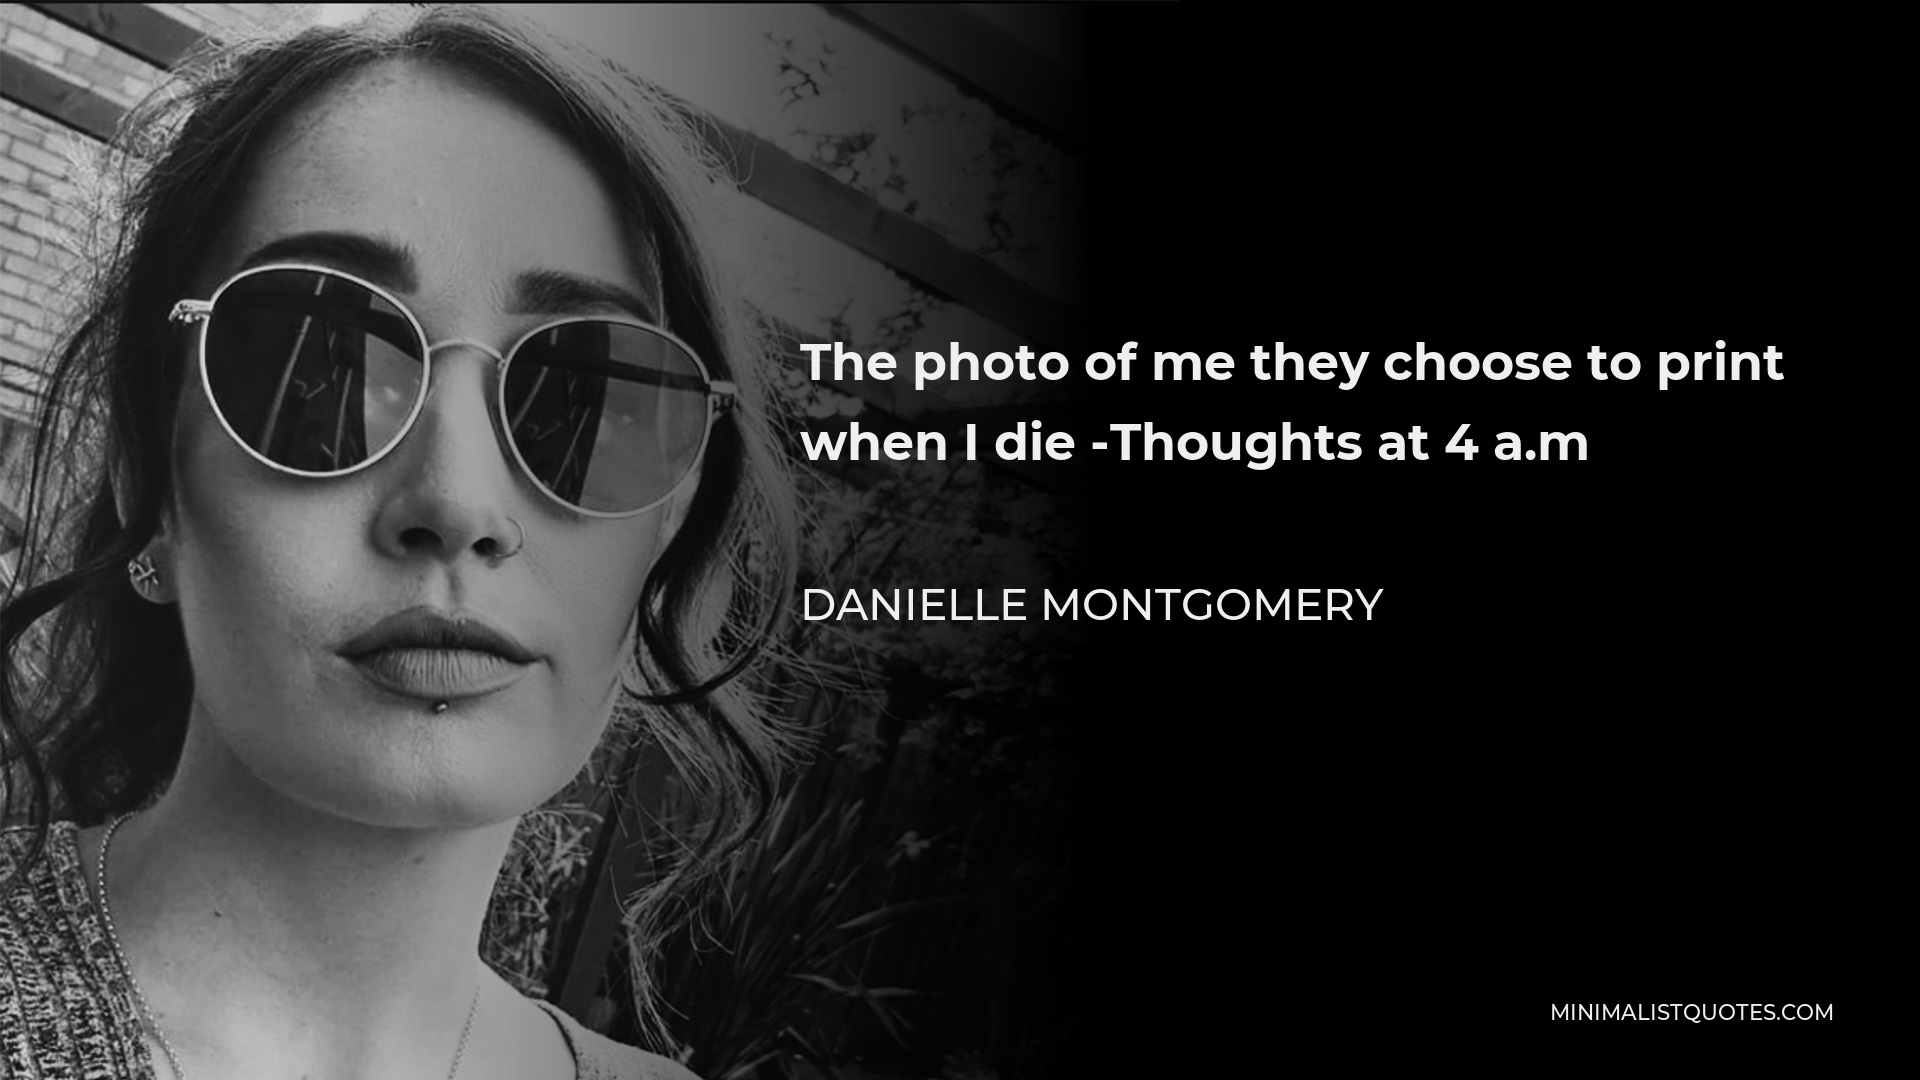 Danielle Montgomery Quote - The photo of me they choose to print when I die -Thoughts at 4 a.m